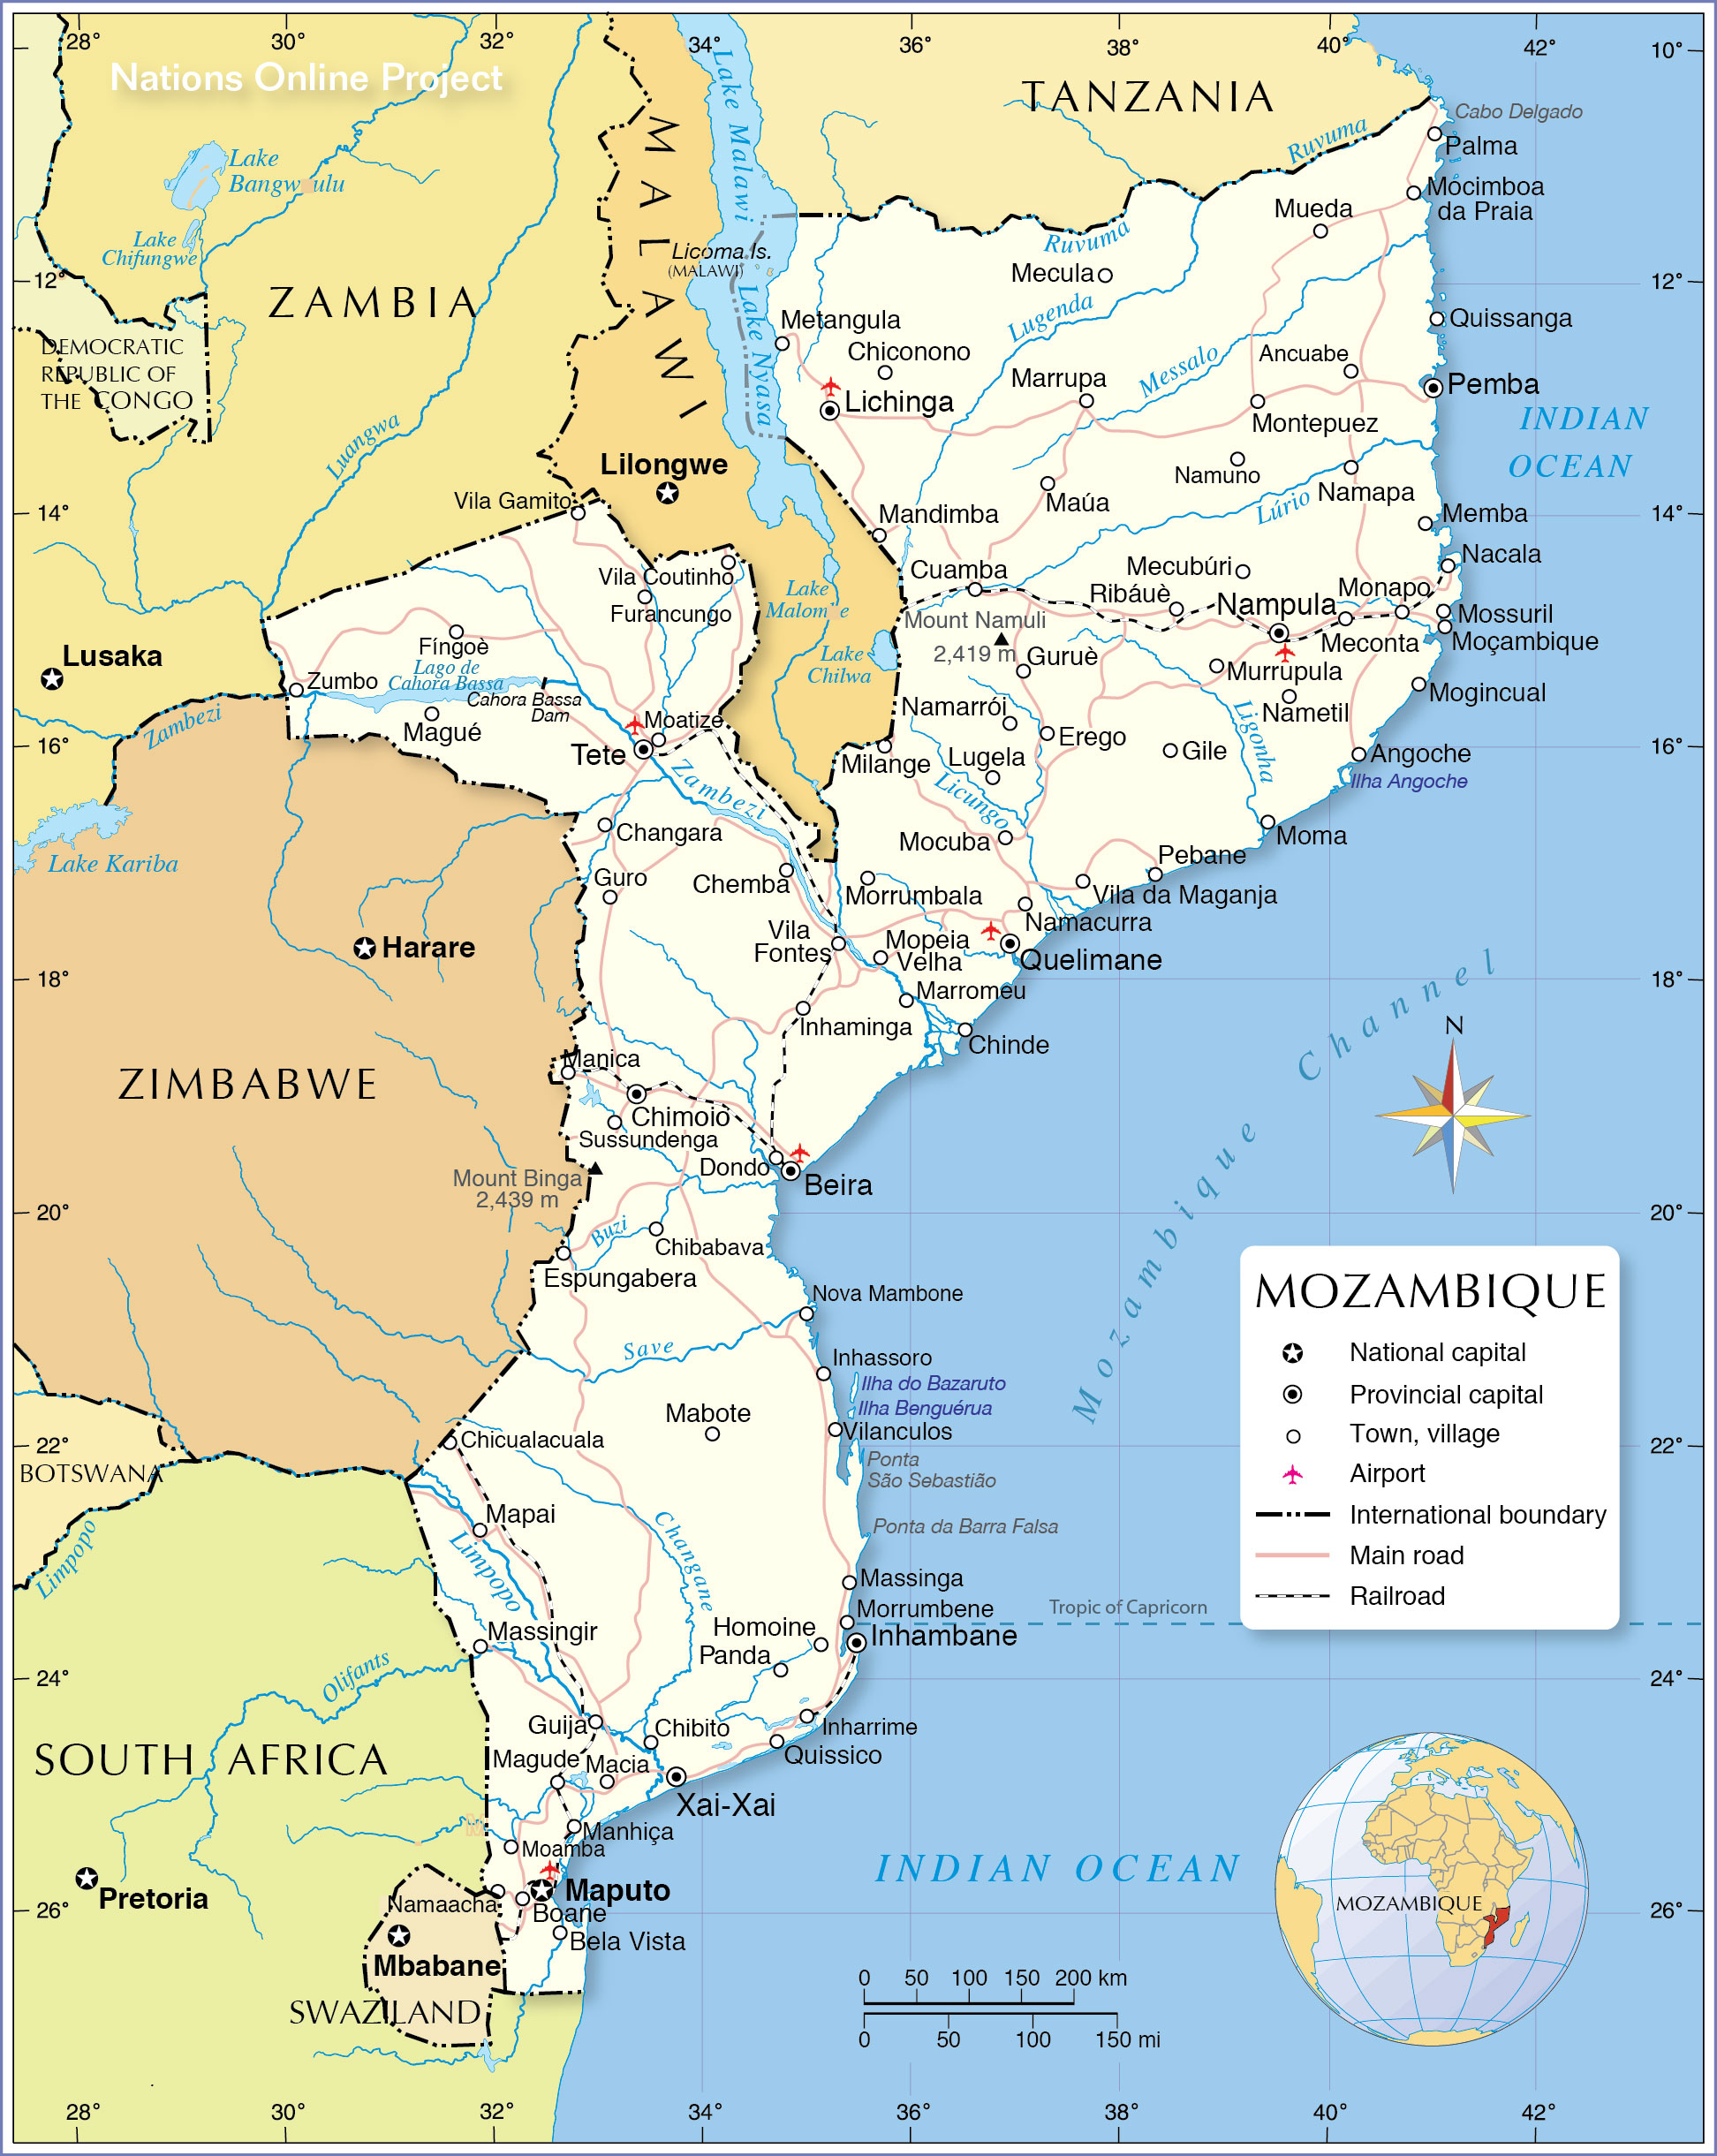 Mozambique On A Map Political Map of Mozambique   Nations Online Project